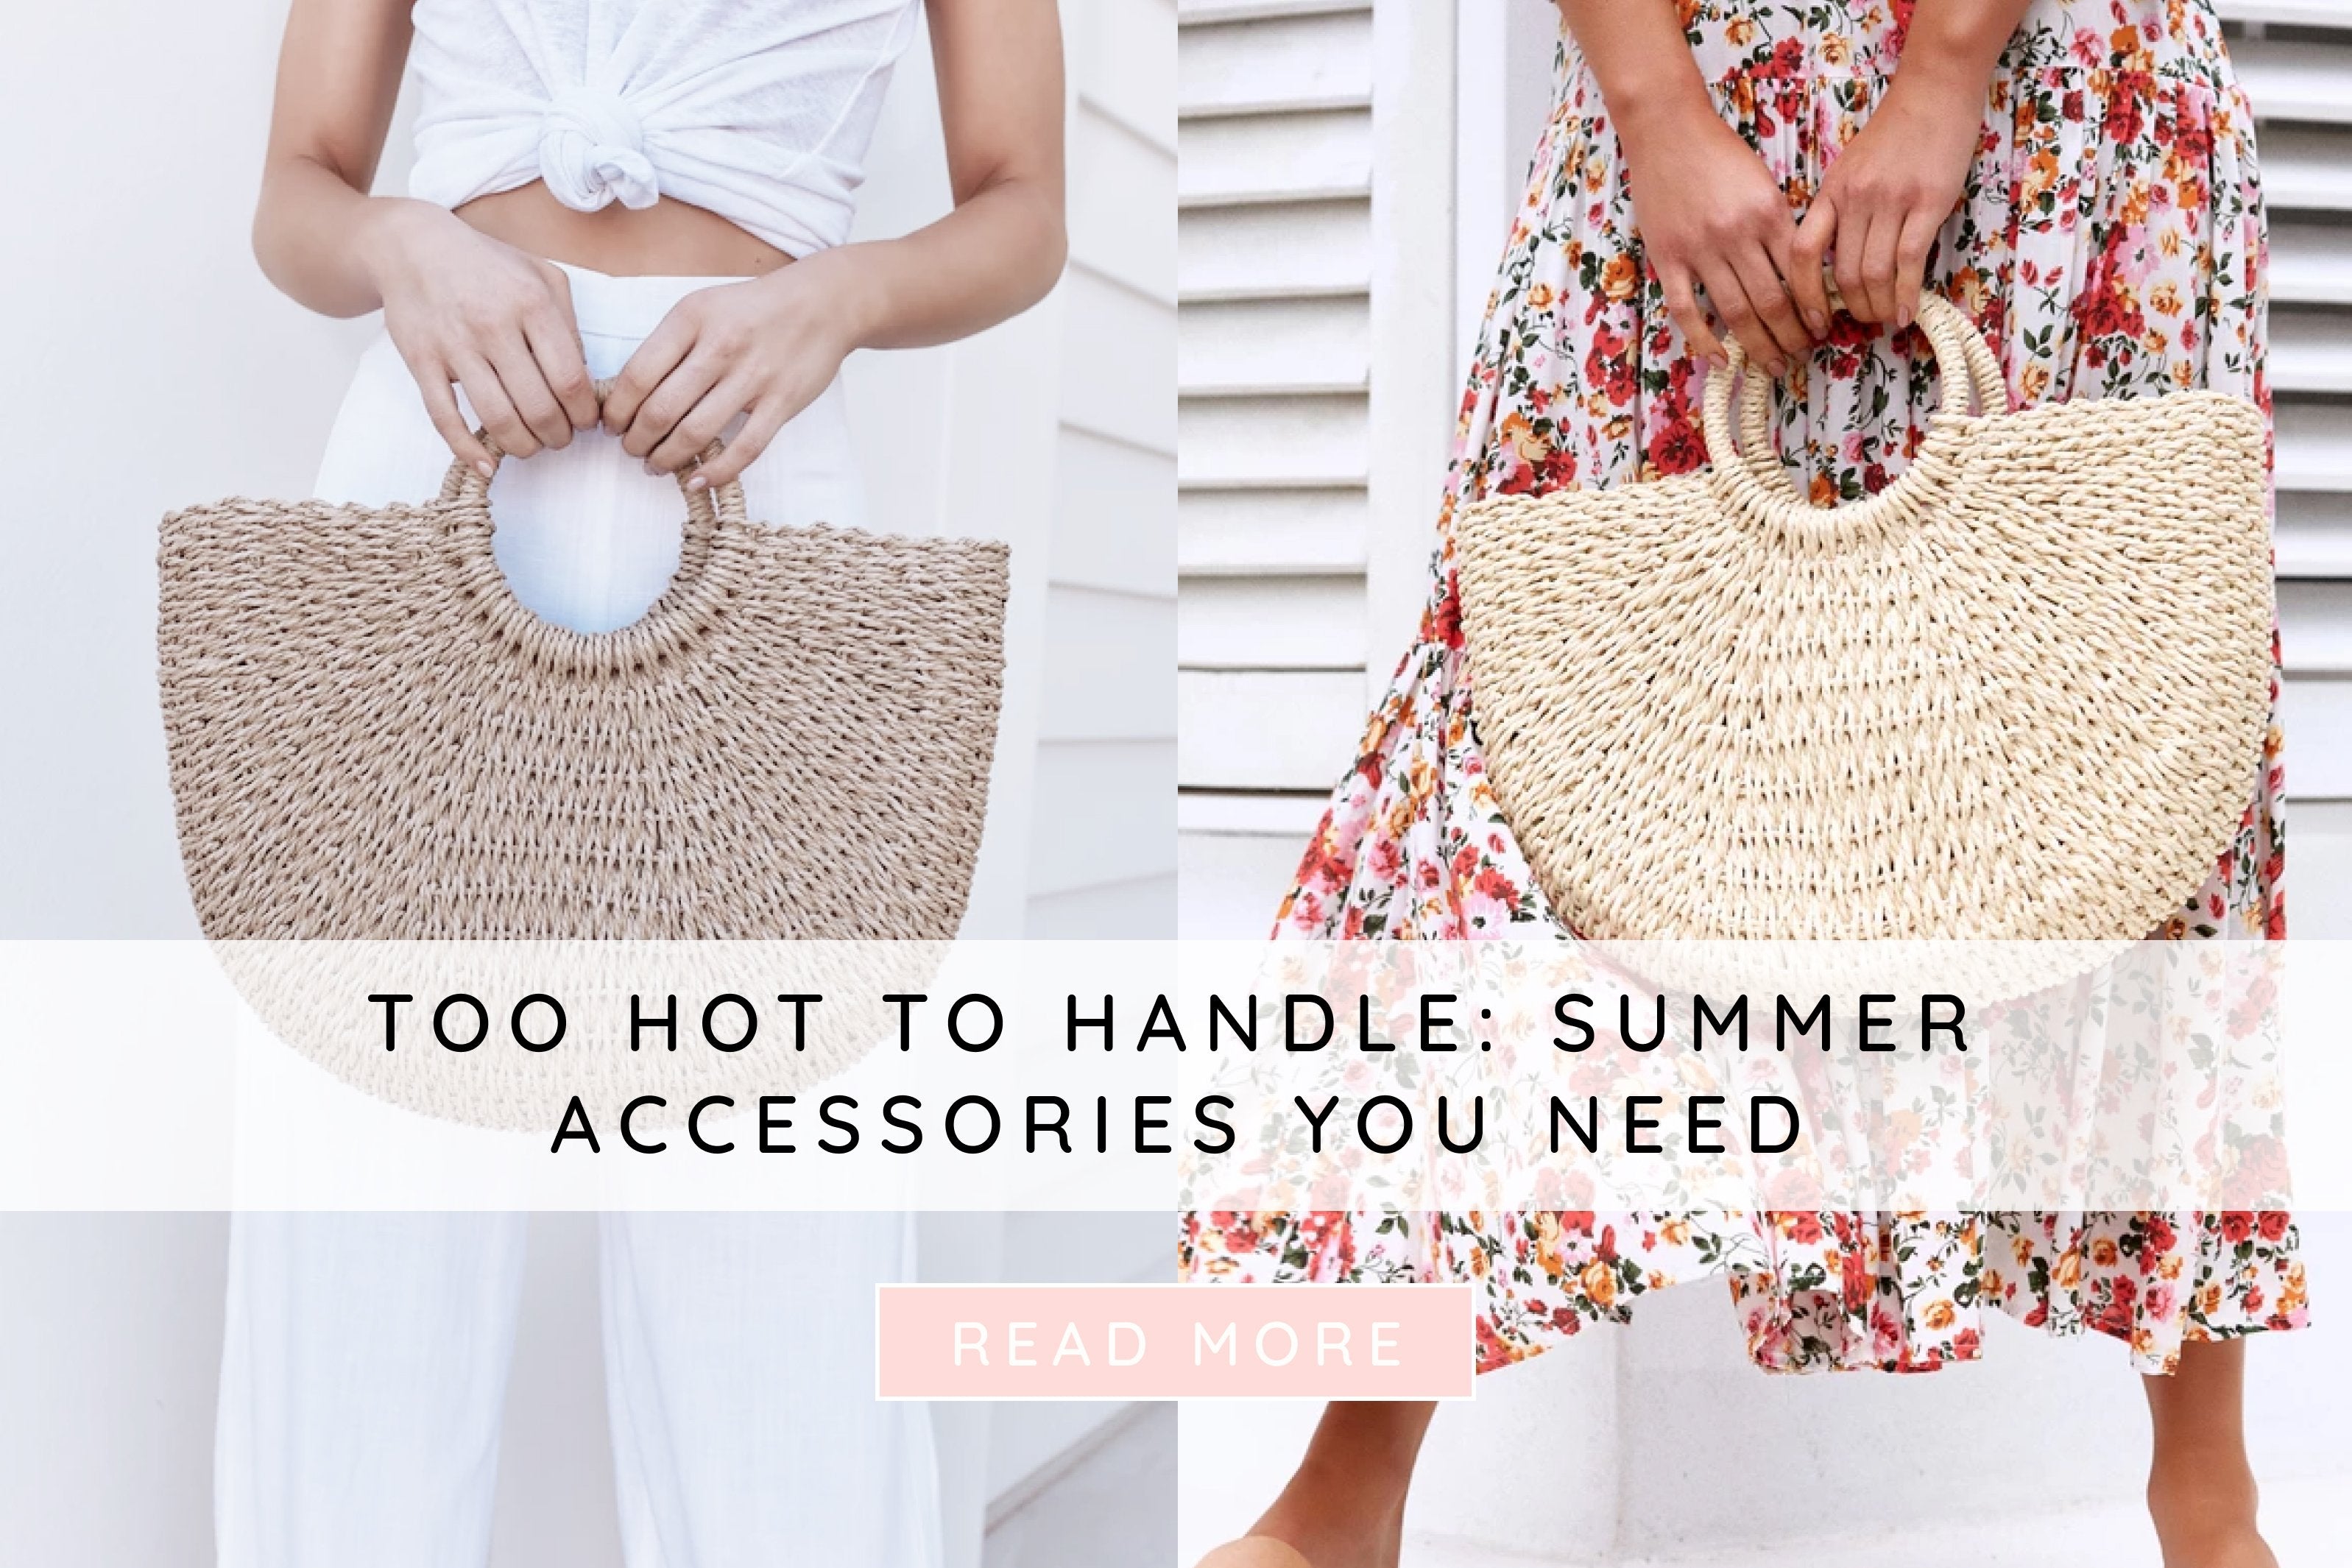 Too hot to handle: summer accessories you need